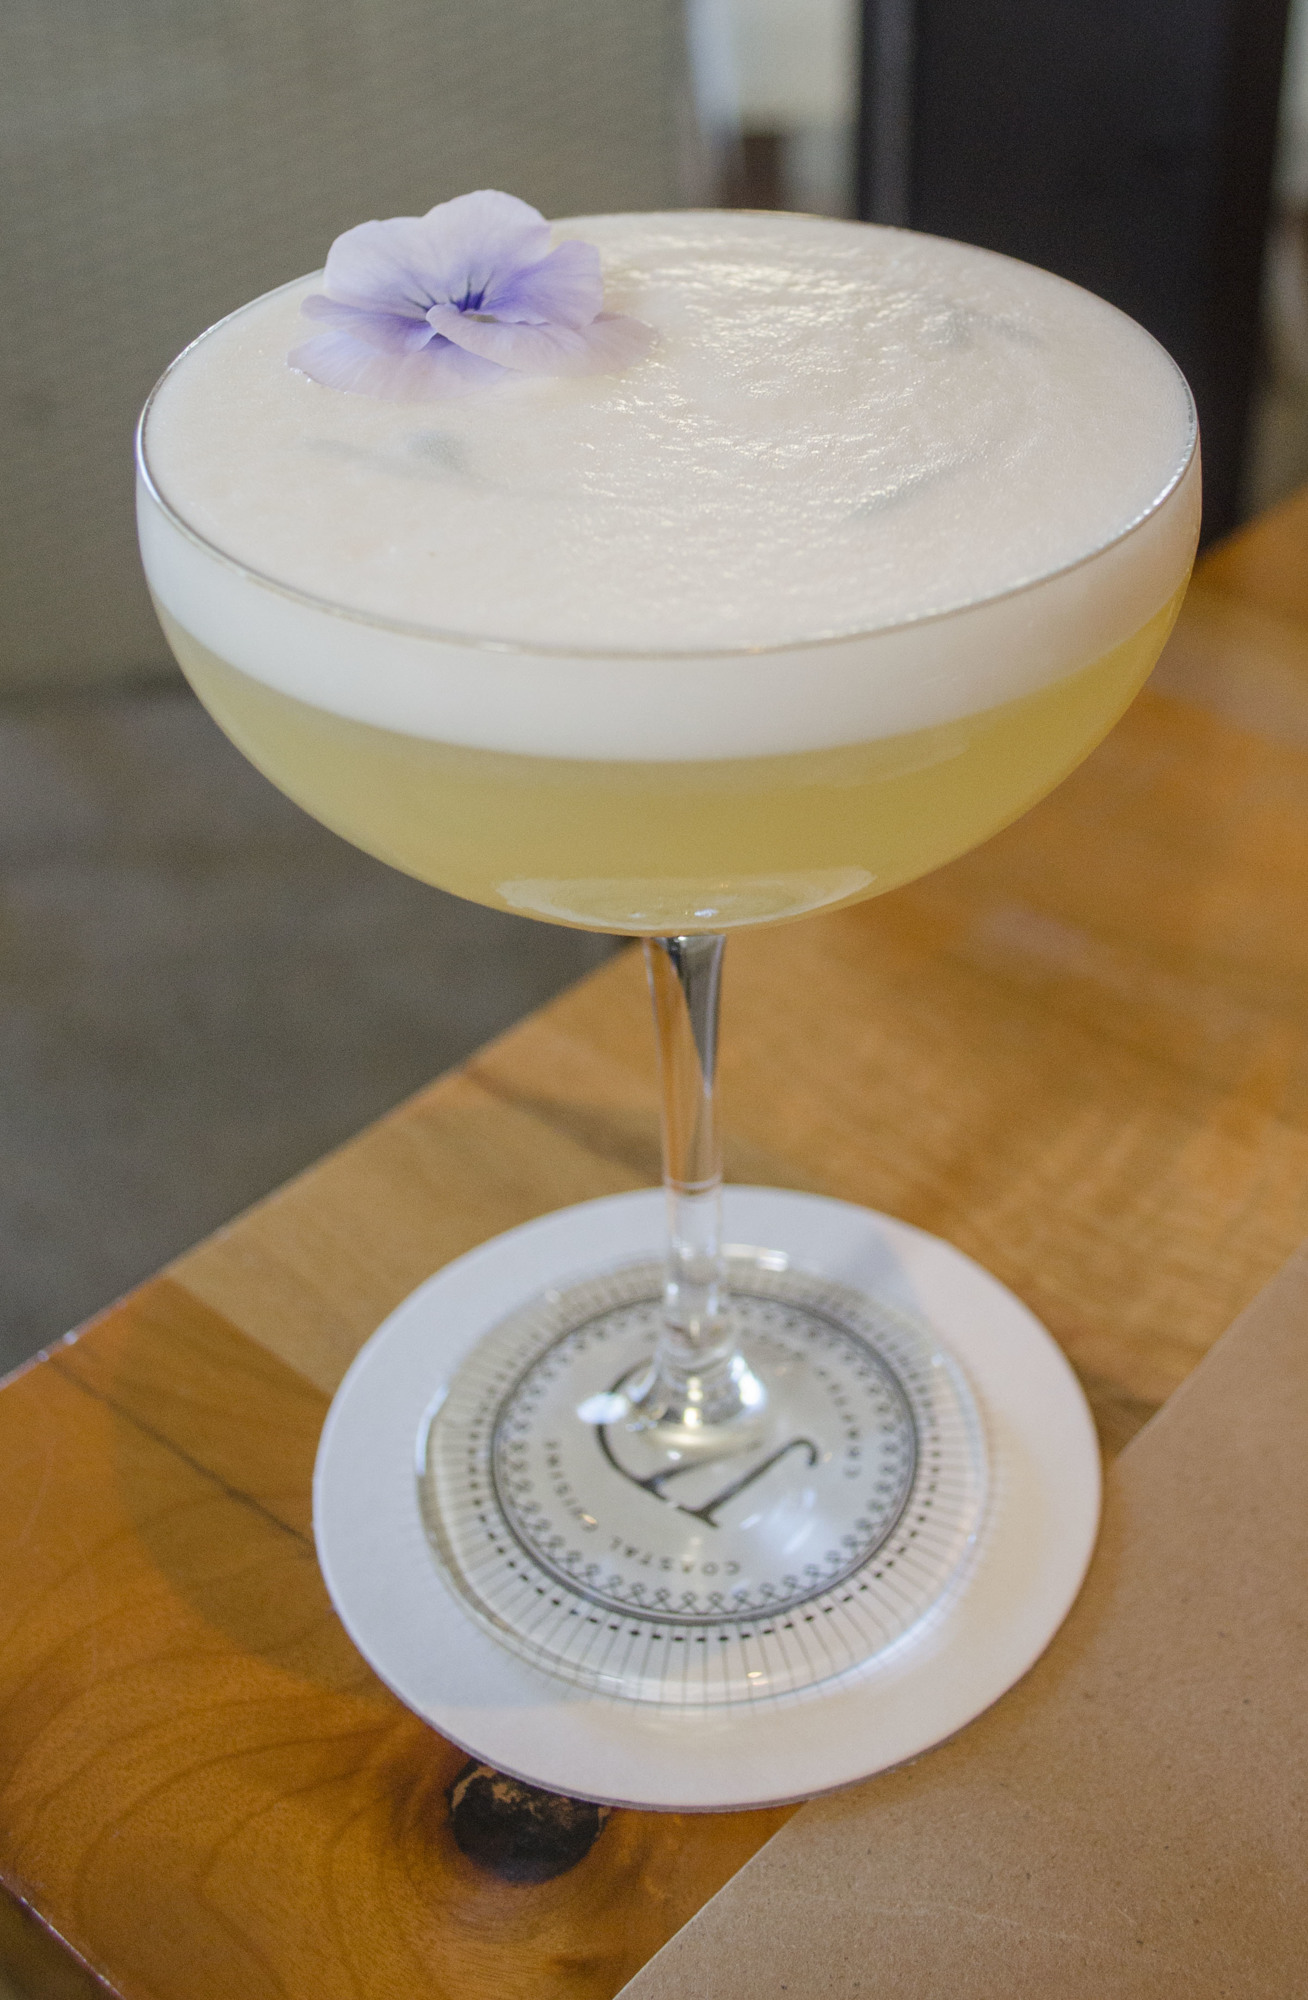 The Southern Hospitality is one of the more frothy drinks on the spring menu. Photo by Niki Kottmann